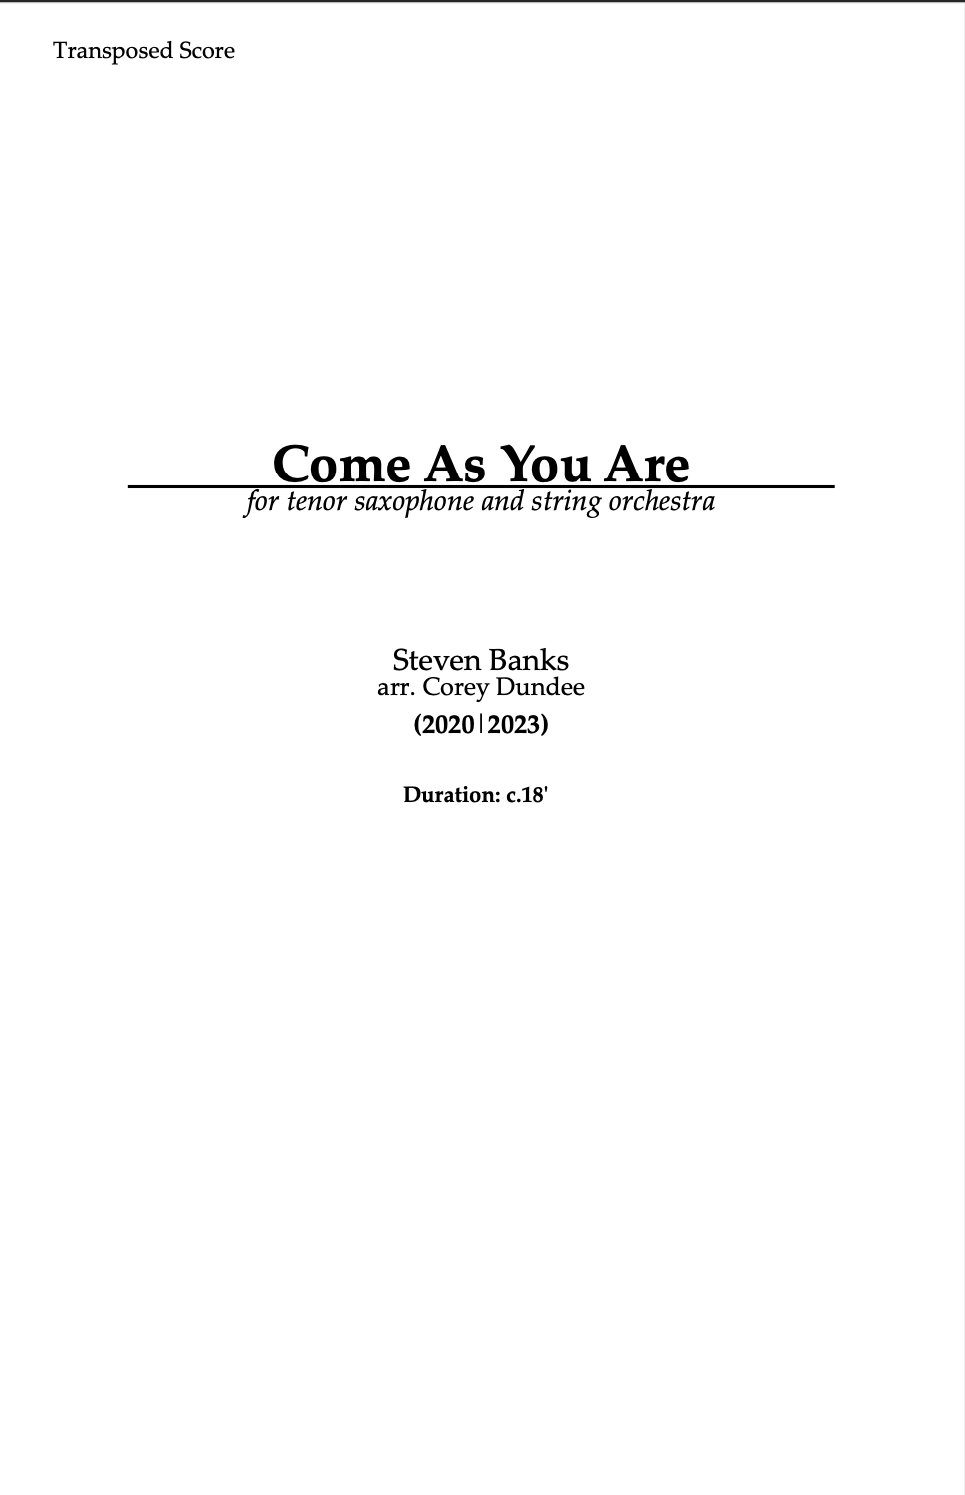 Come As You Are (String Orchestra Version) (Score Only) by Steven Banks arr. Corey Dundee